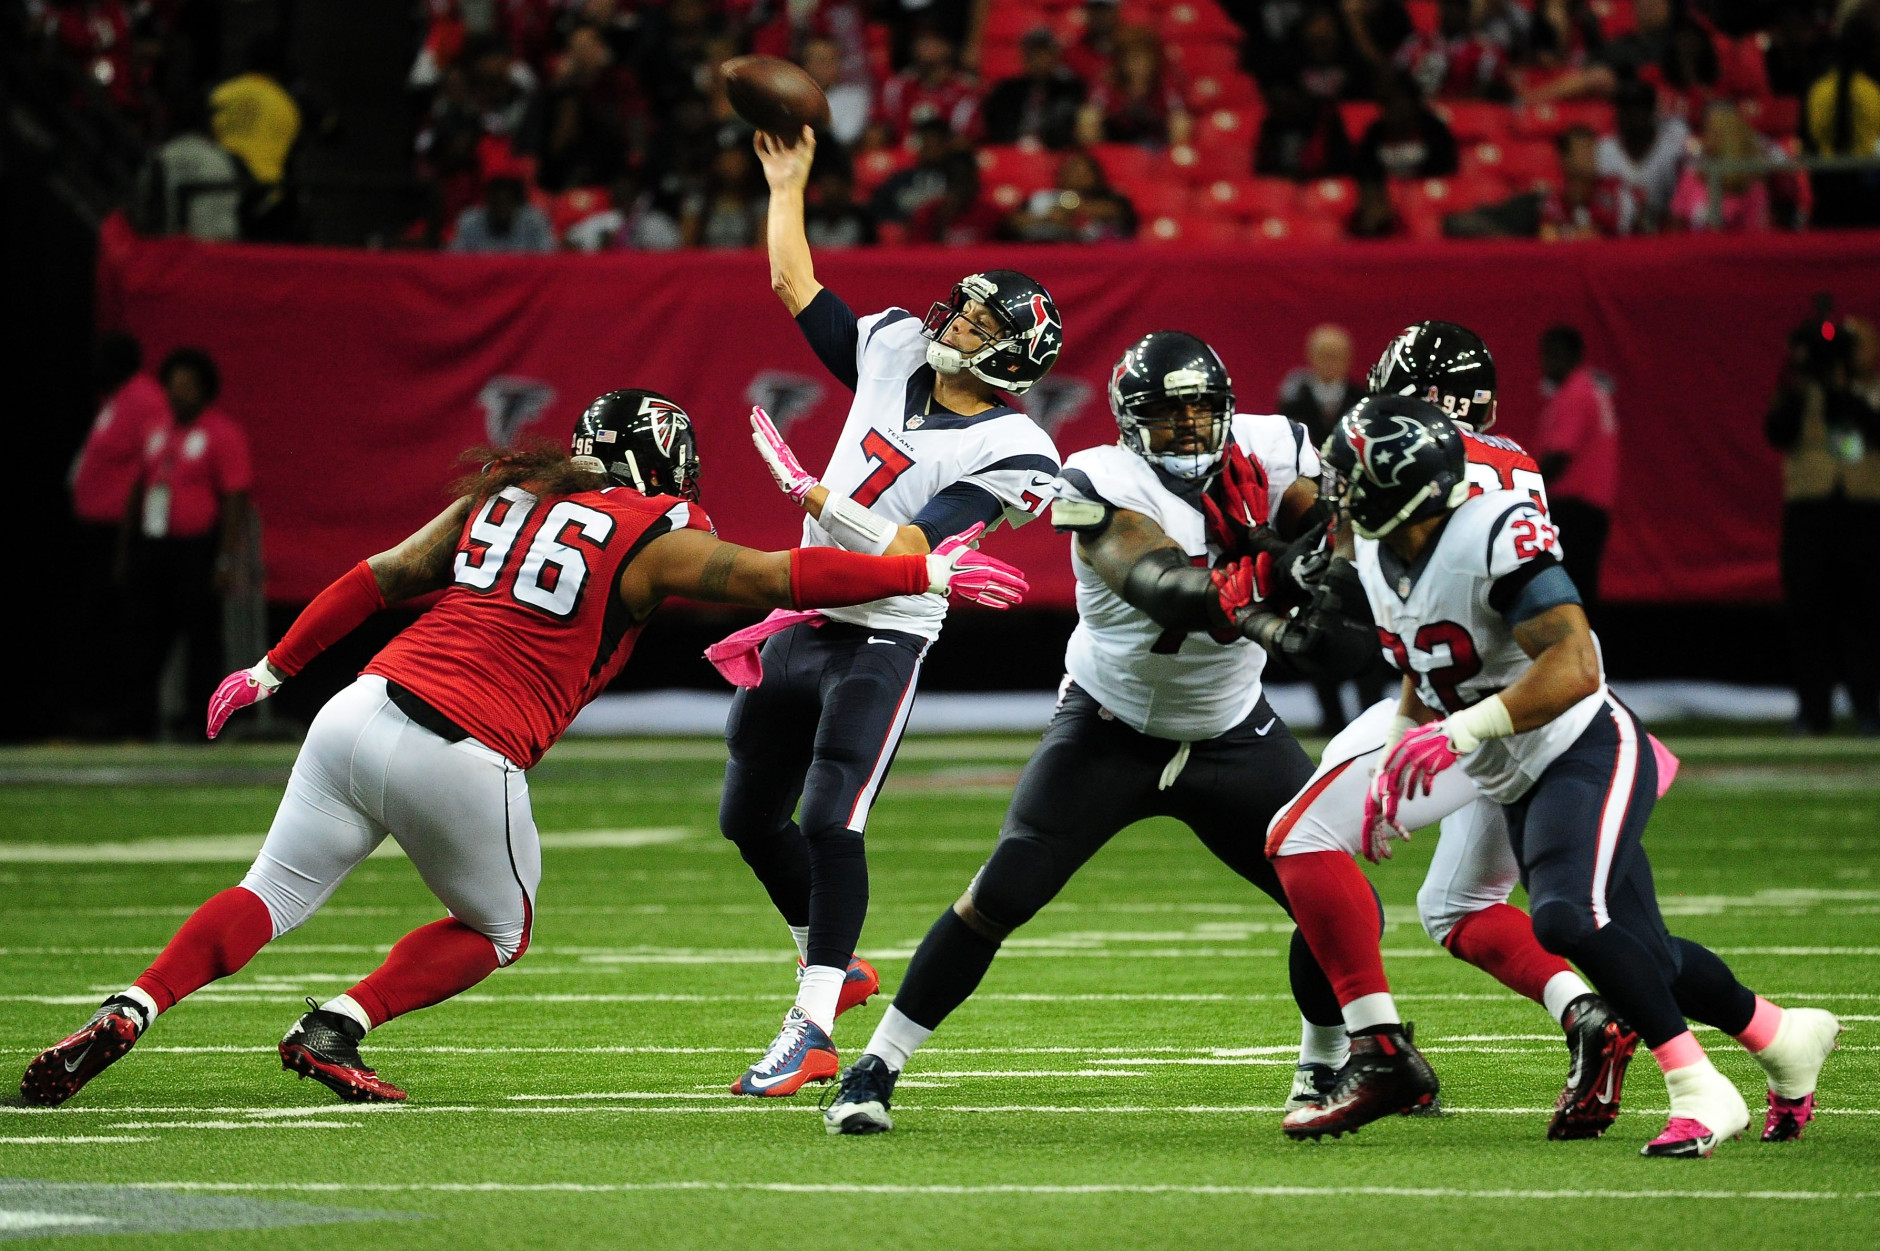 ATLANTA, GA - OCTOBER 04: Brian Hoyer #7 of the Houston Texans throws a pass in the second half against the Atlanta Falcons at the Georgia Dome on October 4, 2015 in Atlanta, Georgia.  (Photo by Scott Cunningham/Getty Images)